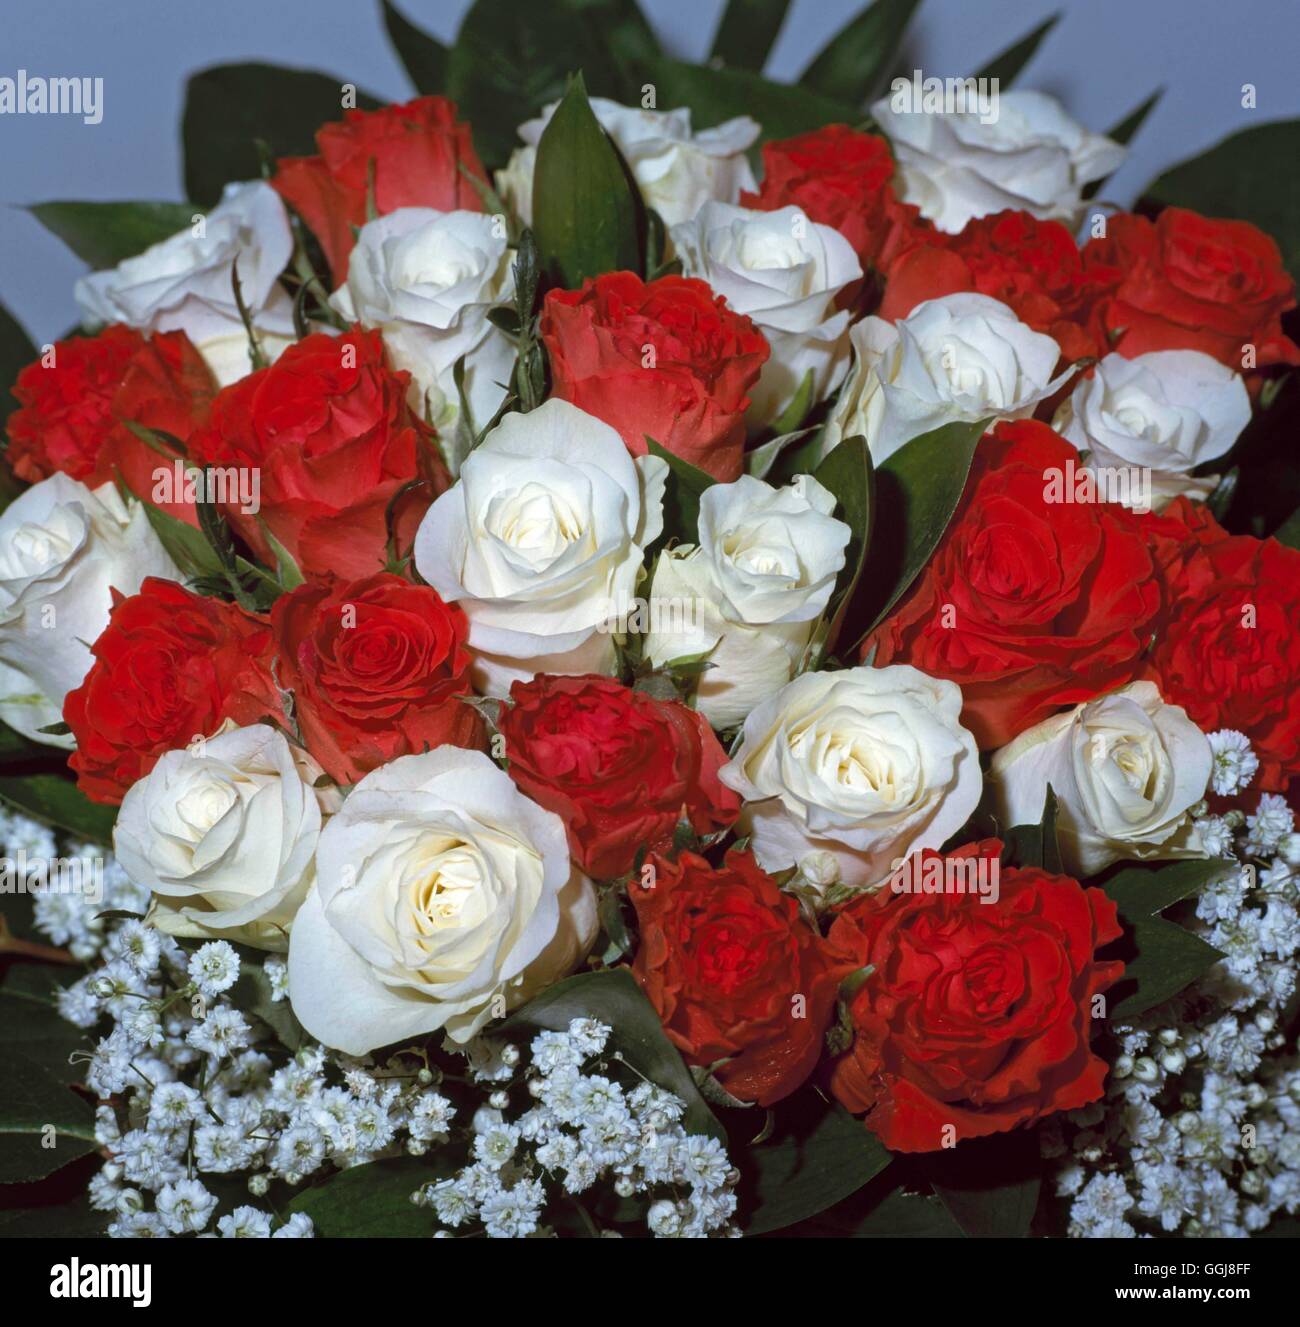 Flower Arrangment/Cut Flowers - Red & White Roses ('Love & Friendship') at IPM Essen 2003.   FAR107236  Compulsory Cre Stock Photo